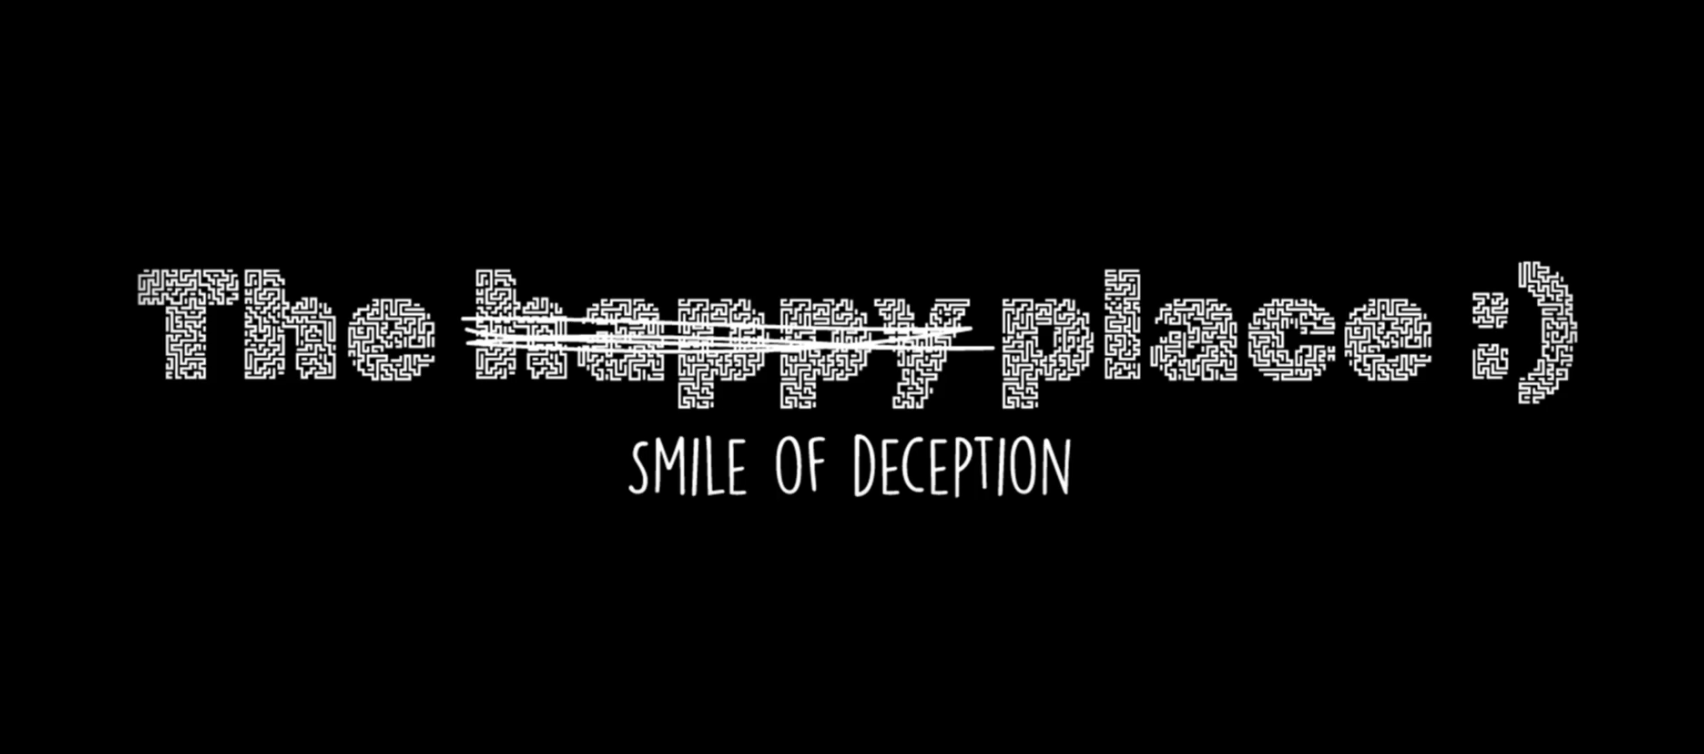 The Happy Place (The Smile Of Deception)